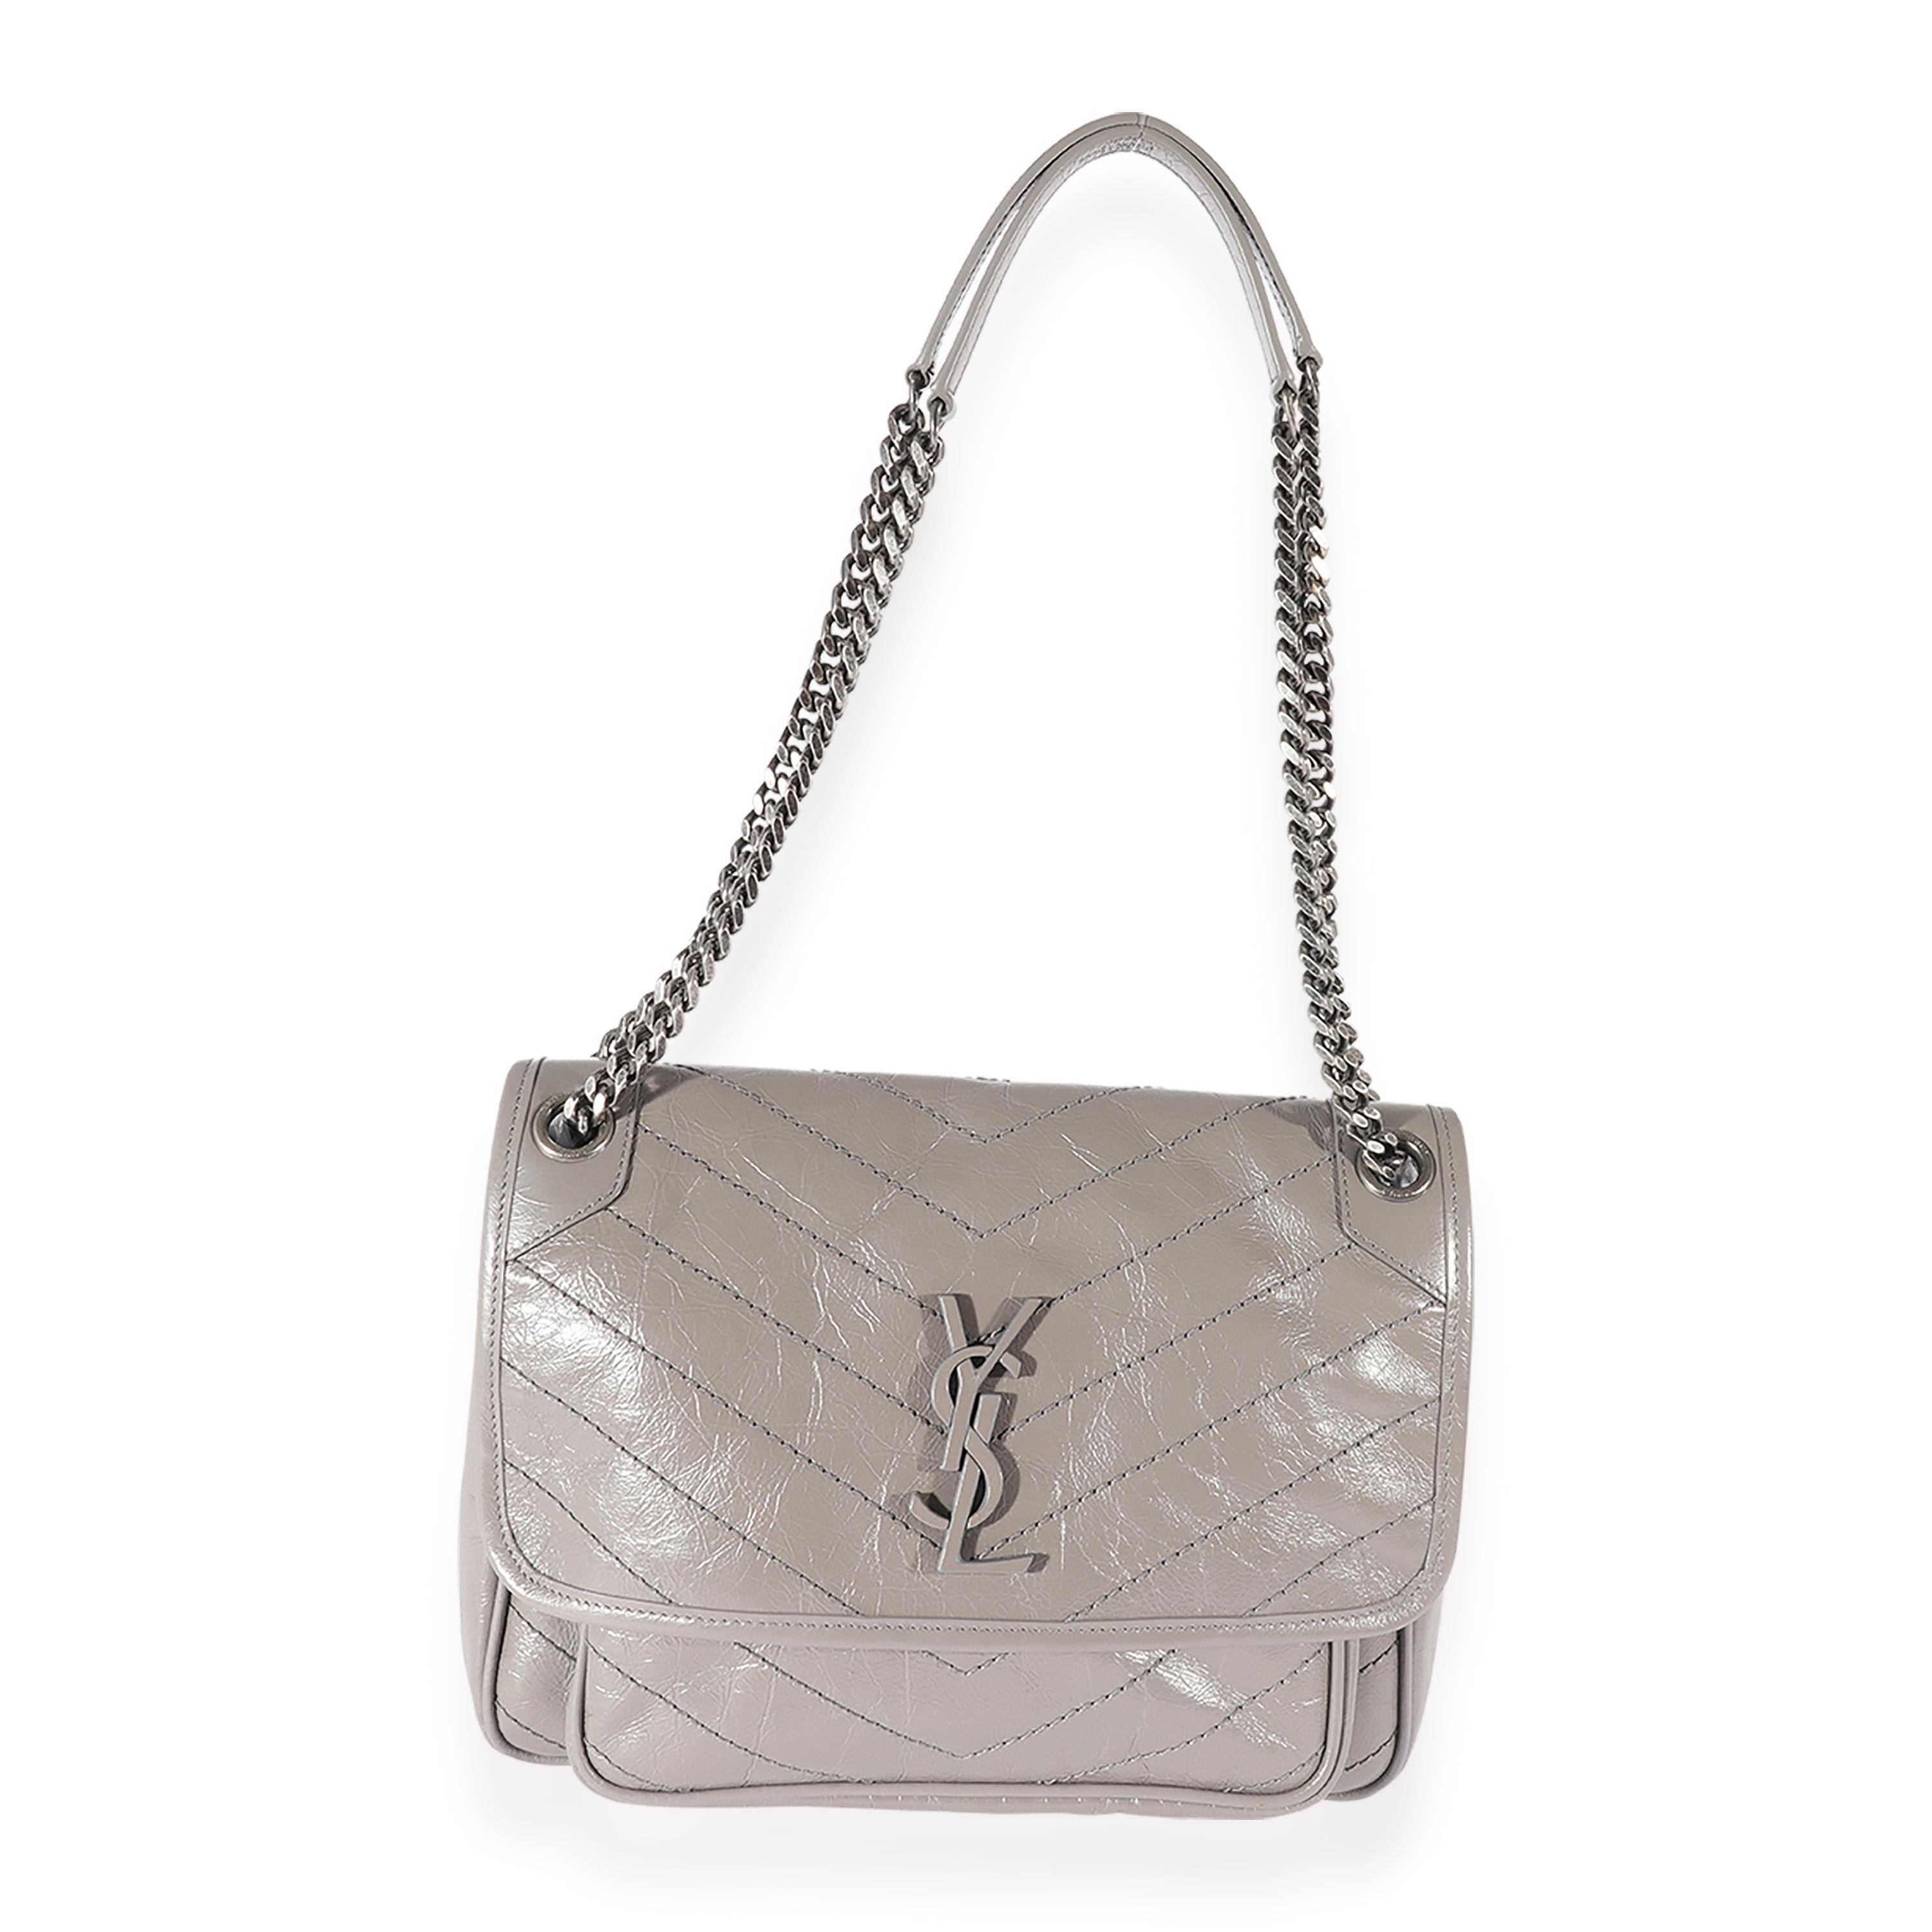 Listing Title: Saint Laurent Grey Leather Medium Niki
SKU: 125508
MSRP: 2690.00
Condition: Pre-owned 
Handbag Condition: Very Good
Condition Comments: Very Good Condition. Plastic at some hardware. Light fraying at exterior base. Light scuffing at